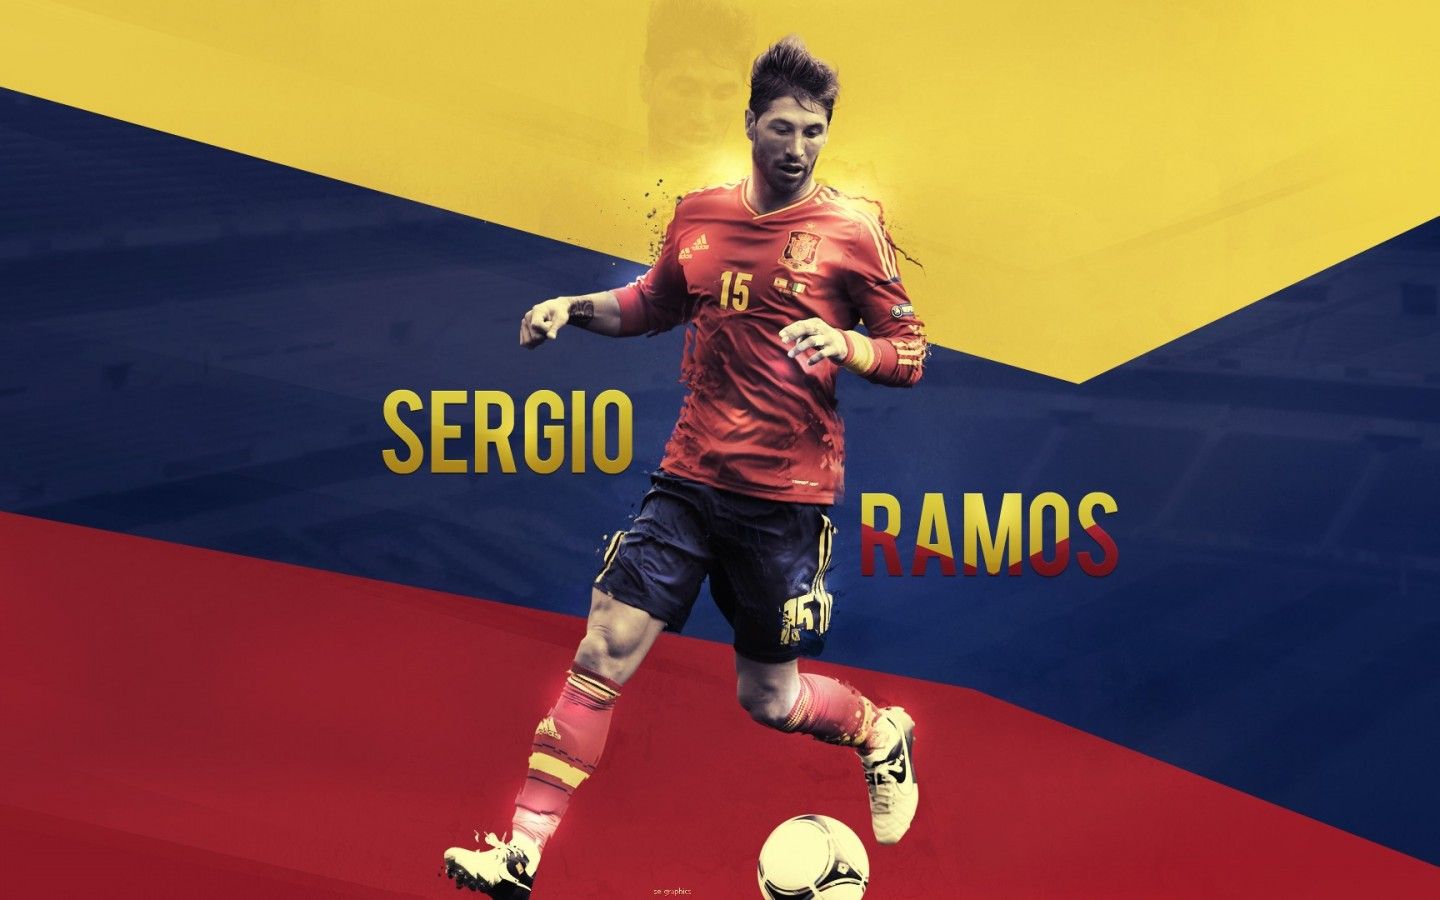 national team sergio ramos hd wallpaper - Background Wallpapers ...